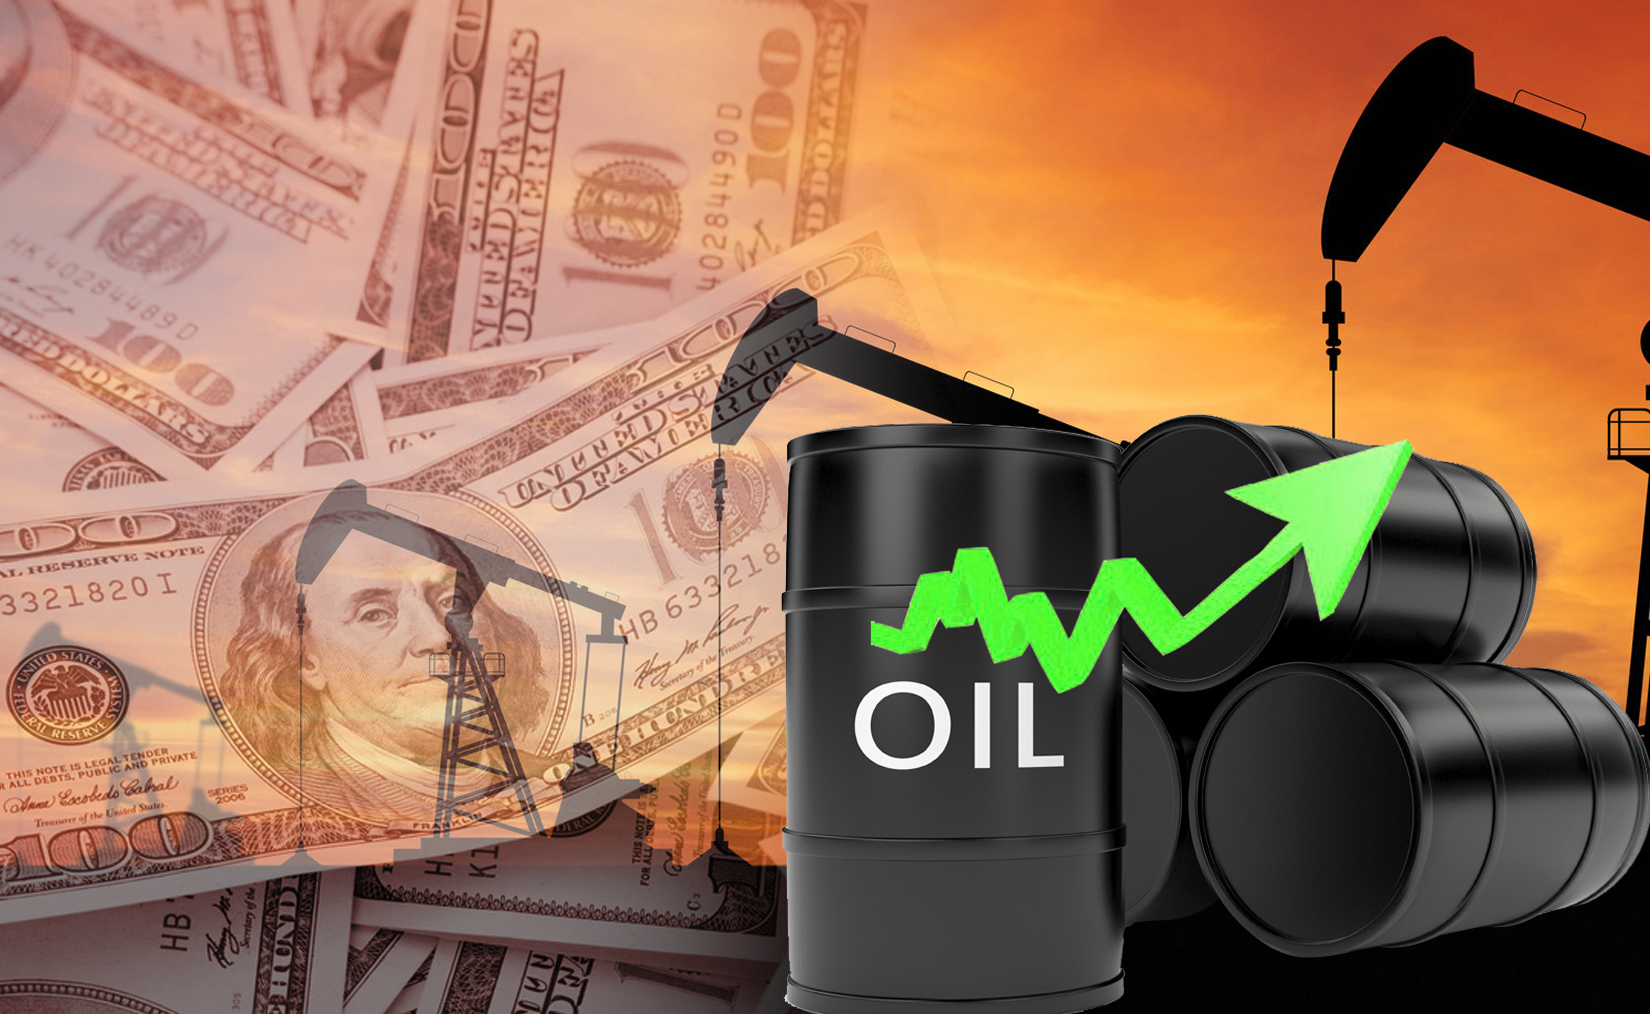 Kuwait oil price by 89 cents to USD 33.90 pb                                                                                                                                                                                                              